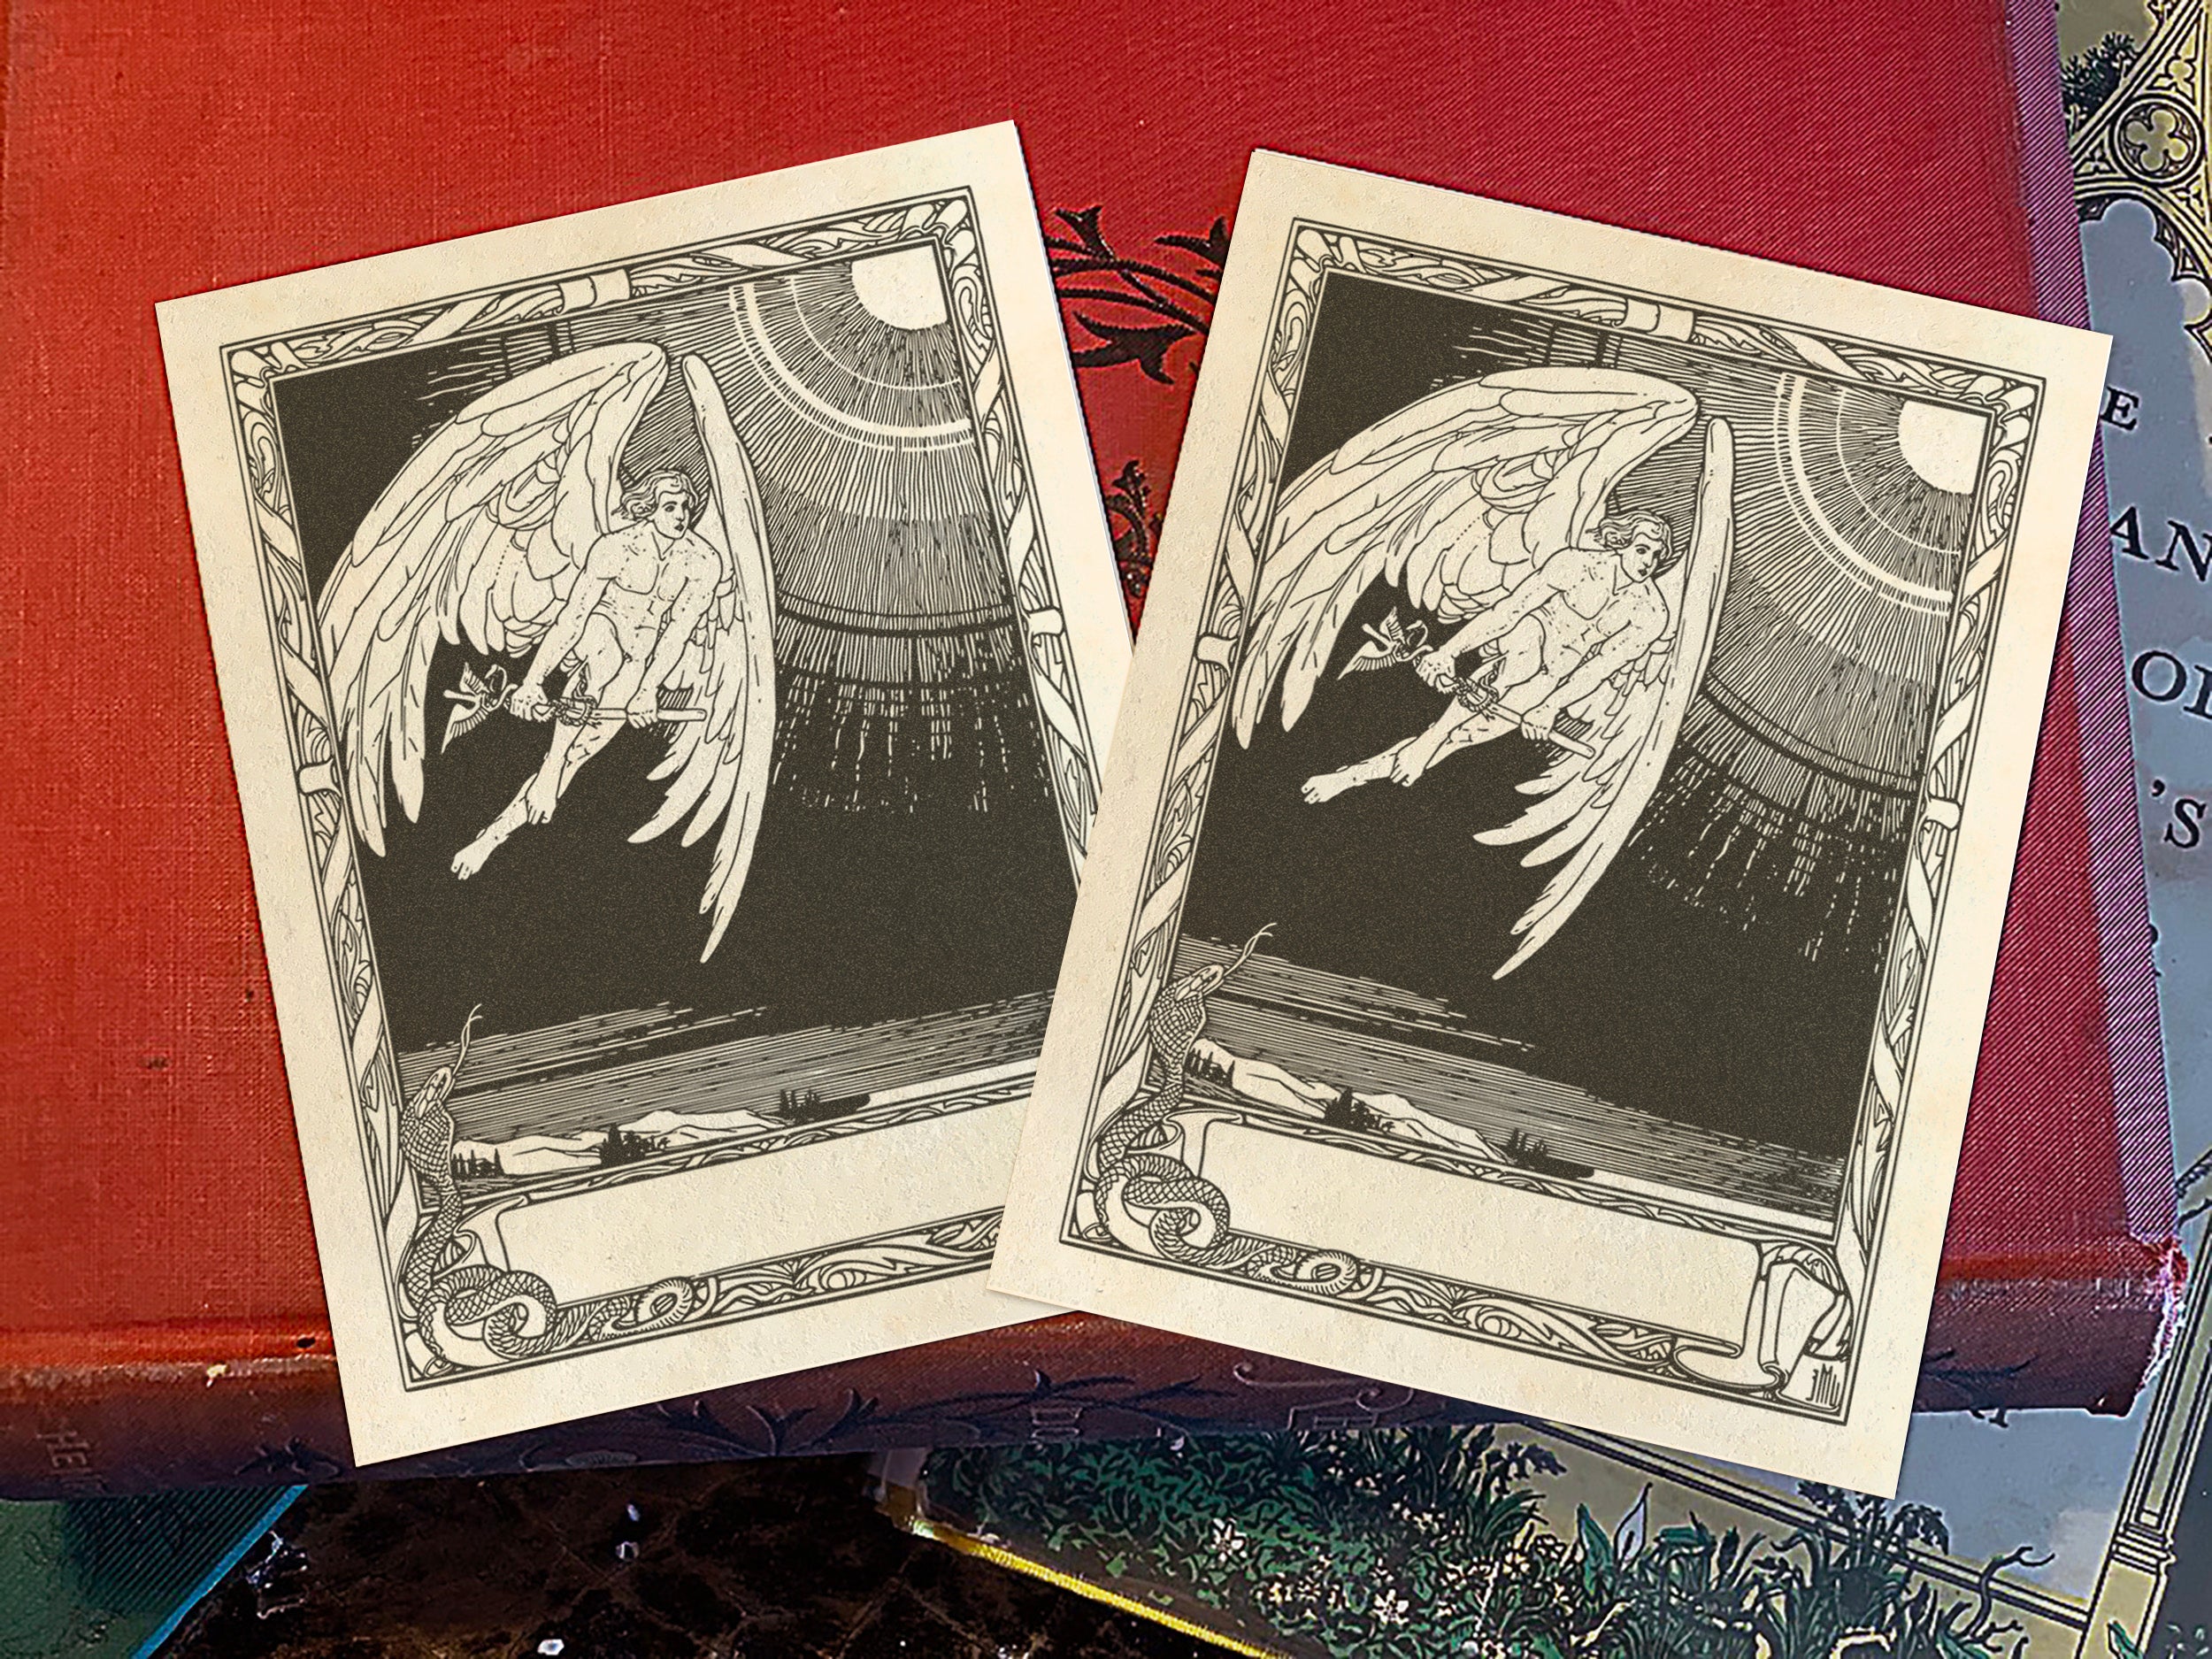 Hermes, Personalized Gothic Ex-Libris Bookplates, Crafted on Traditional Gummed Paper, 3in x 4in, Set of 30